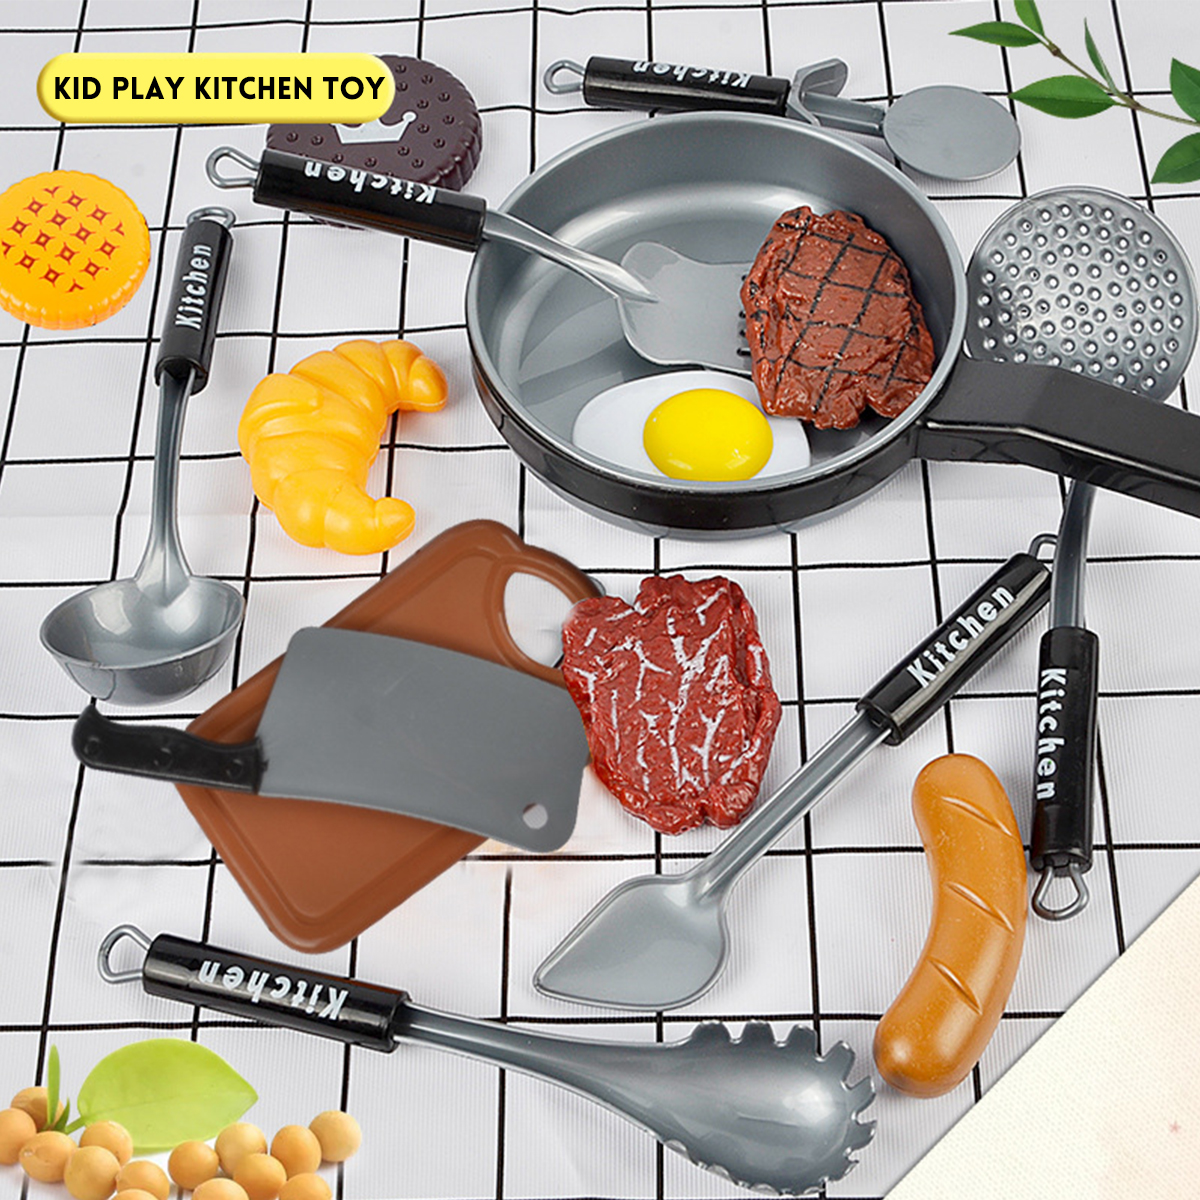 1636-Pcs-Kid-Play-House-Toy-ABS-Plastic-Kitchen-Cooking-Pots-Pans-Food-Dishes-Cookware-Toys-1627711-3